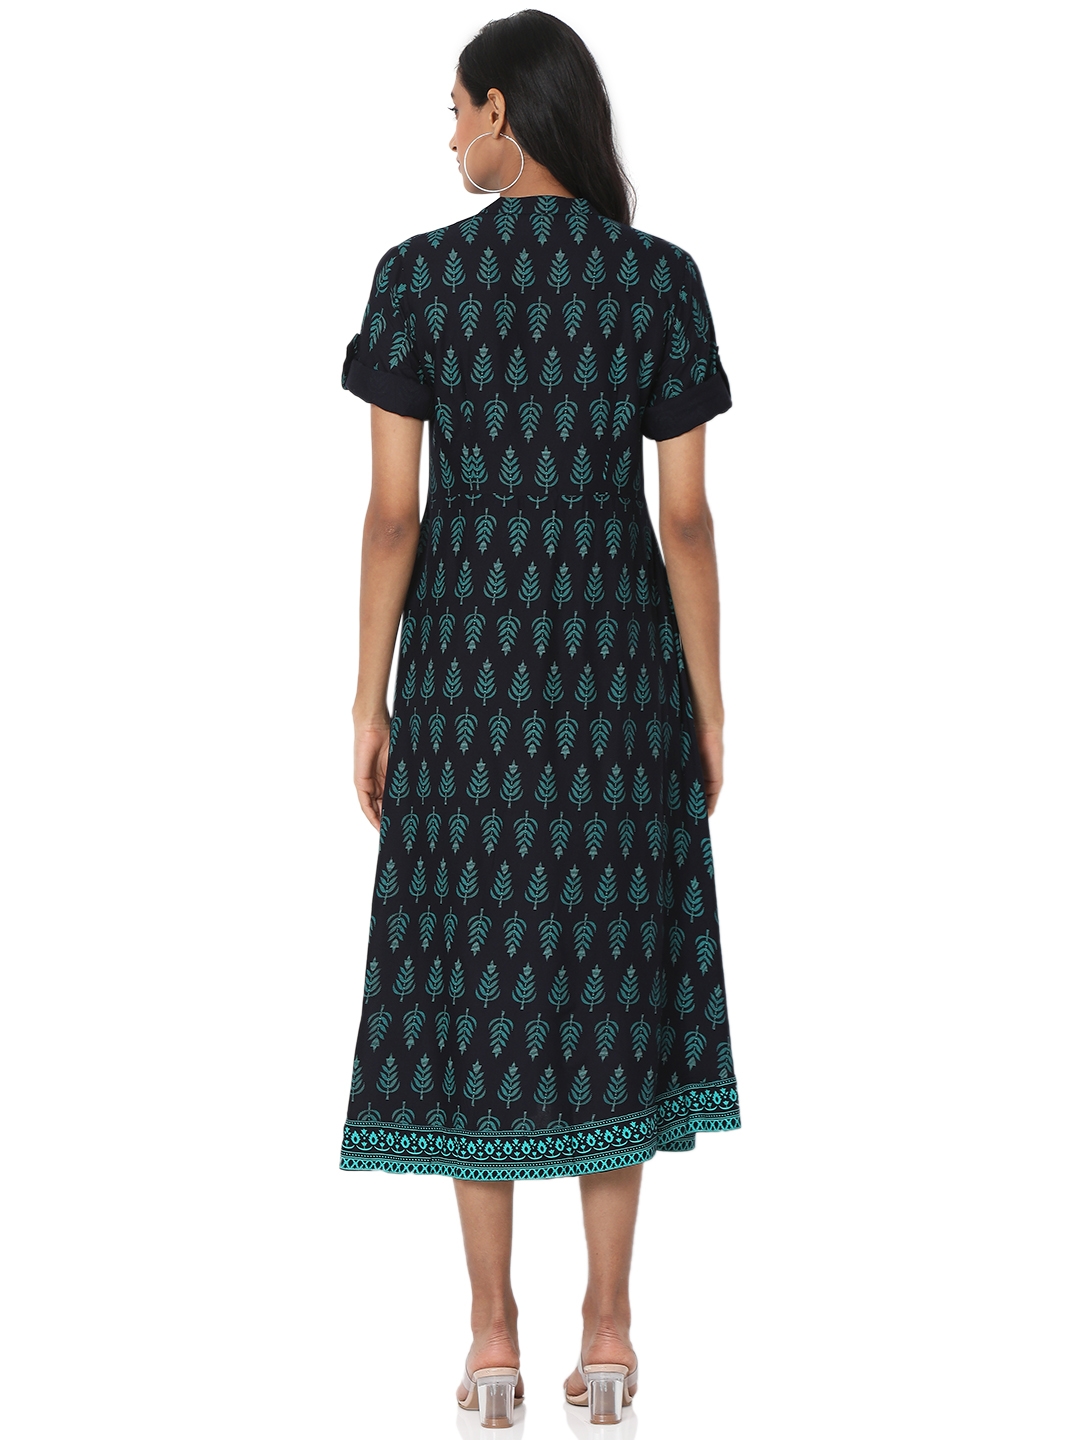 Smarty Pants | Smarty Pants women's cotton fabric green color alpine tree printed dress. 3